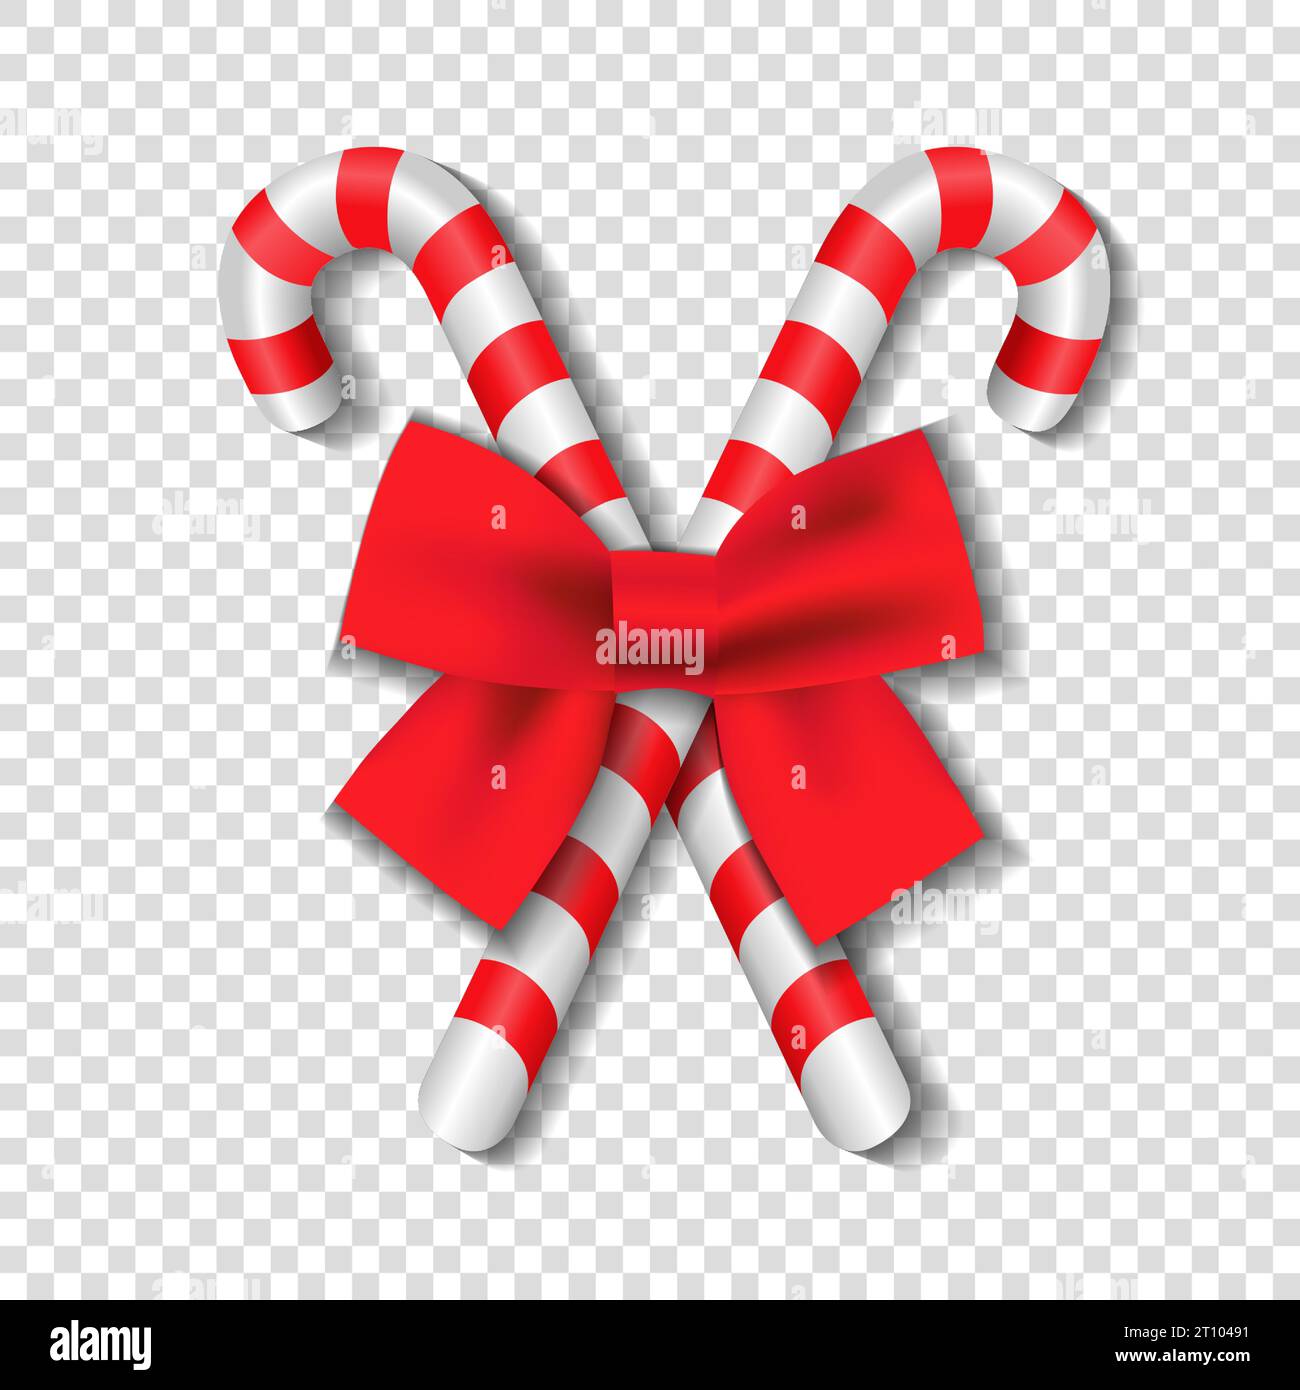 Realistic 3d christmas candy cane with red bow on transperent background. Mint hard candy cane striped in Xmas colours. Vector illustration Stock Vector